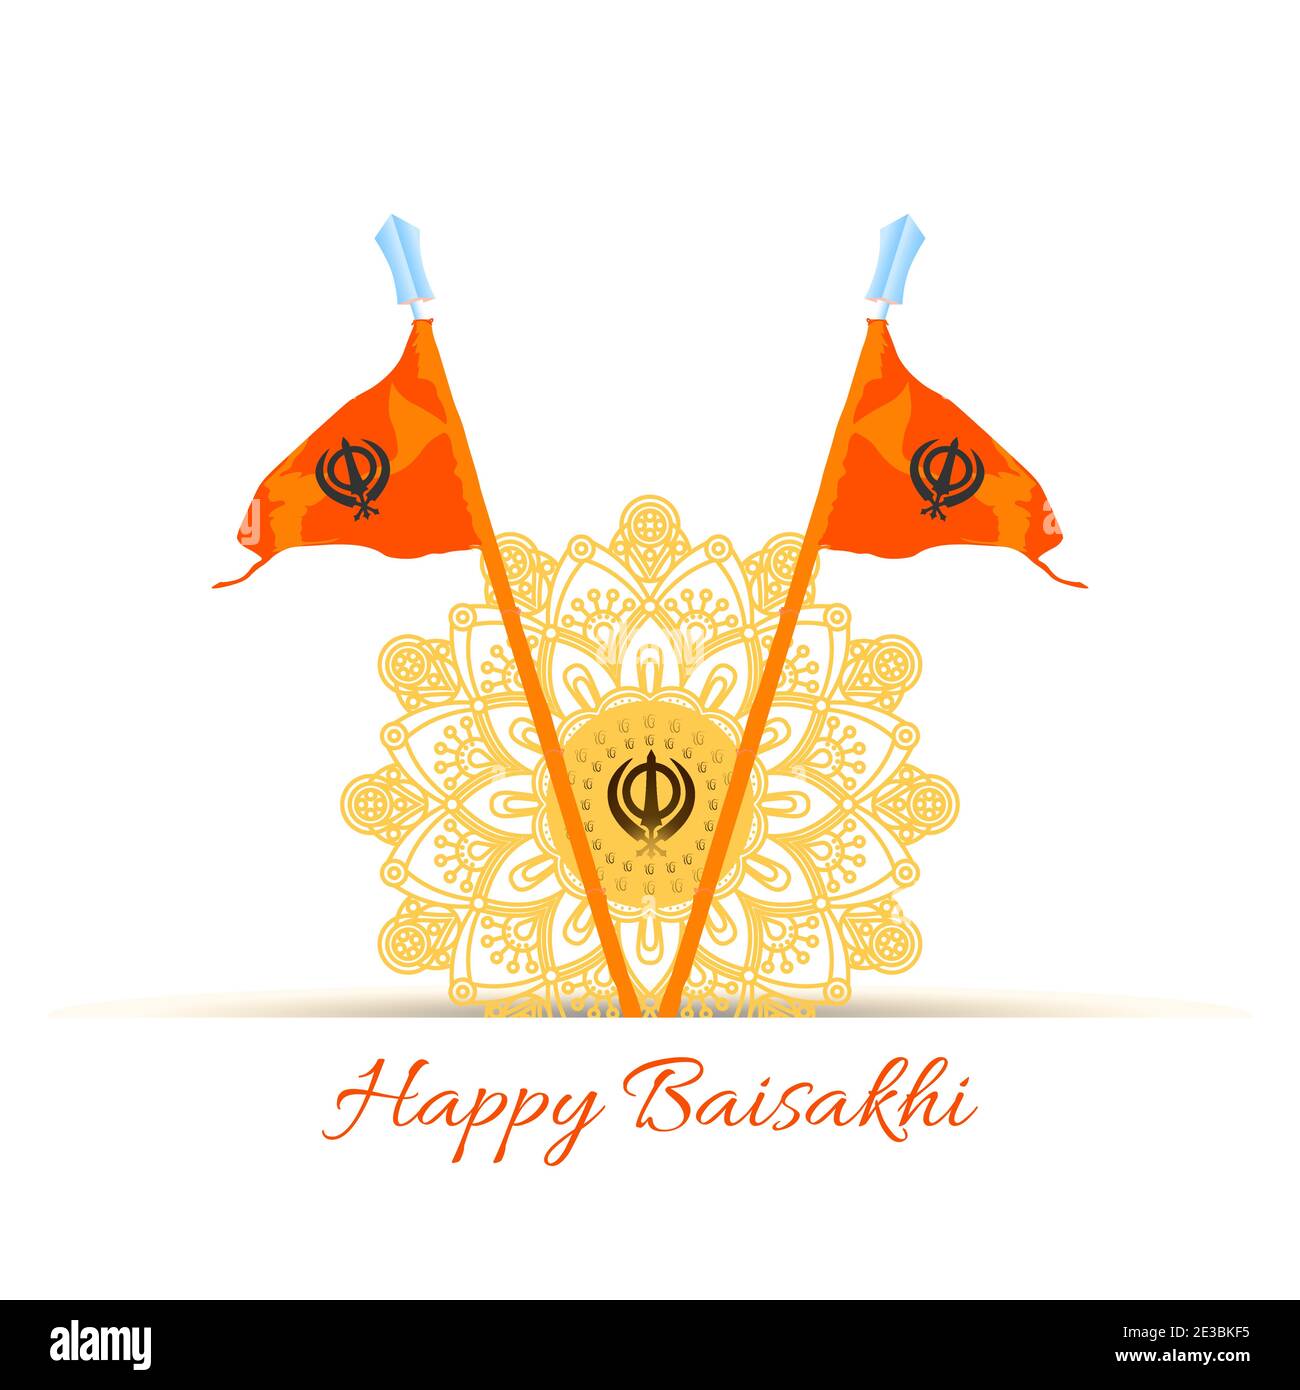 Baisakhi festival Cut Out Stock Images & Pictures - Alamy